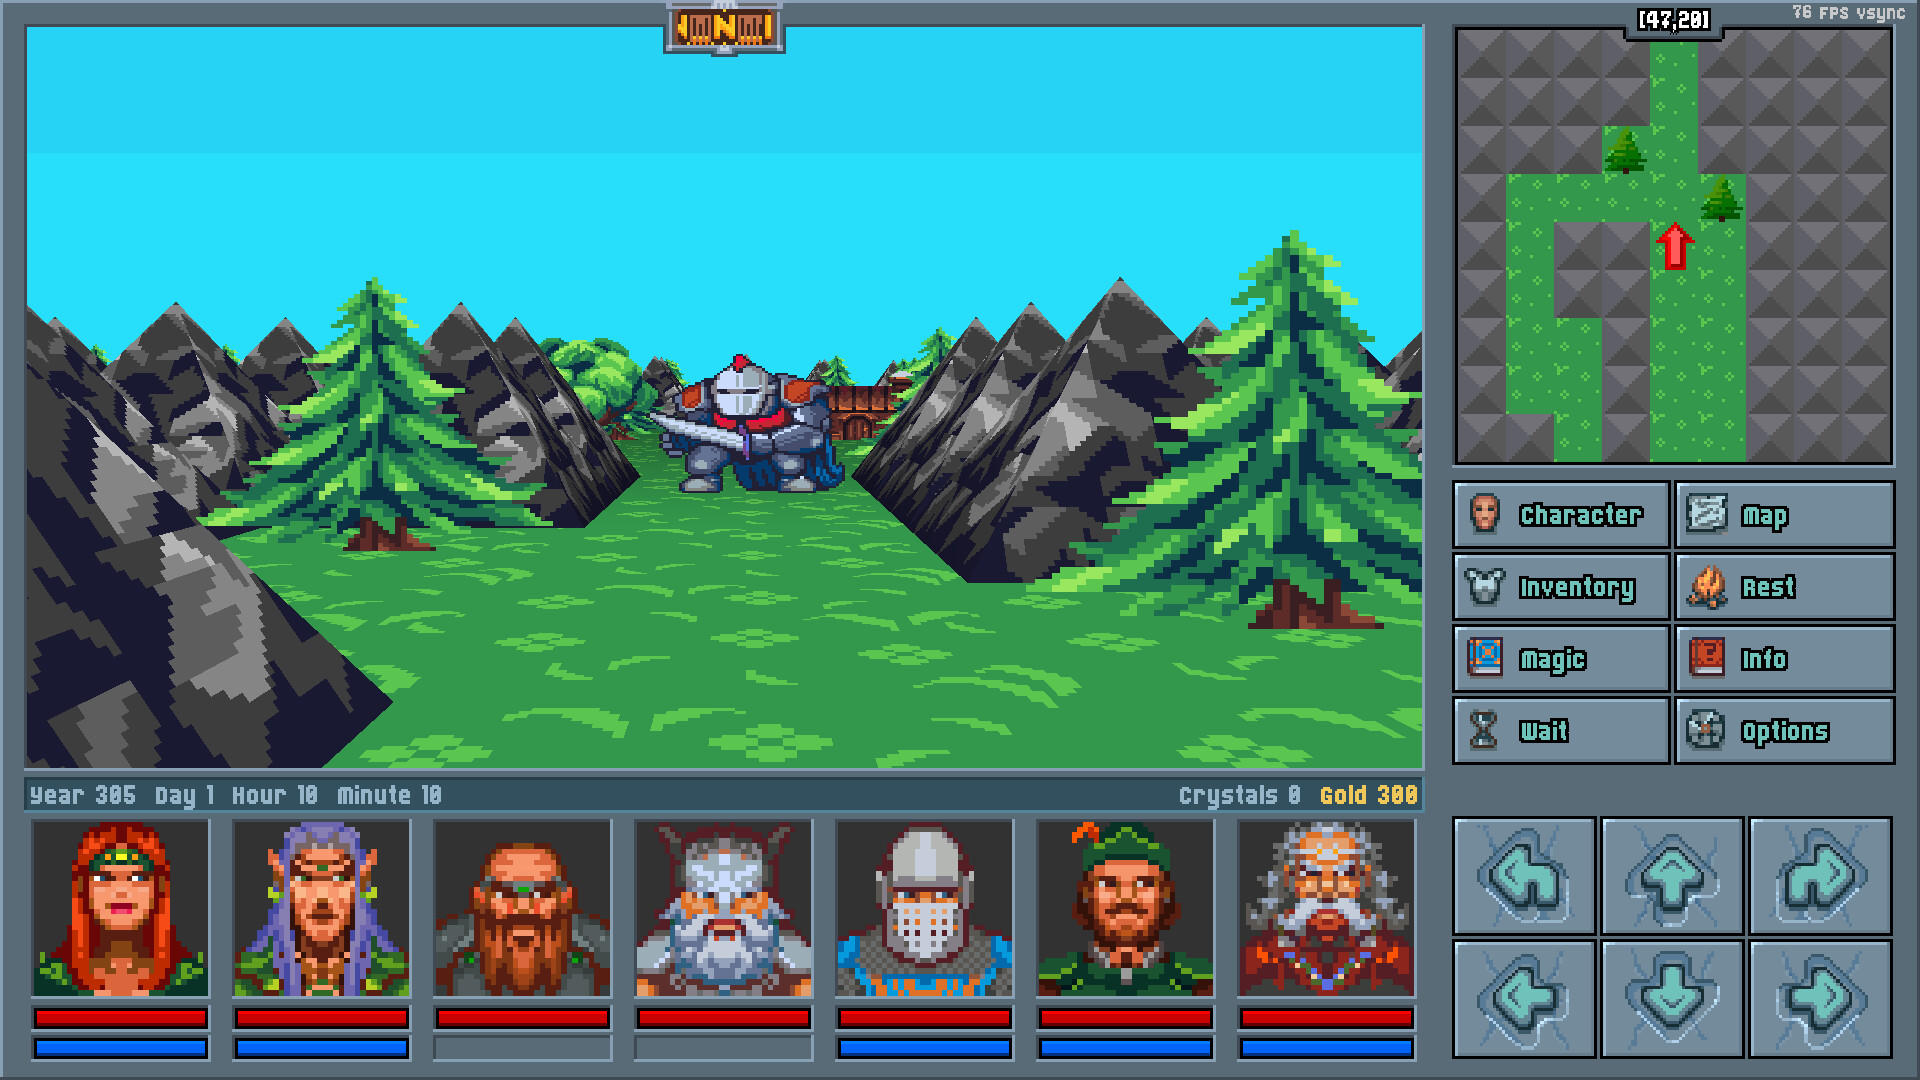 Screenshot of Legends of Amberland II: The Song of Trees